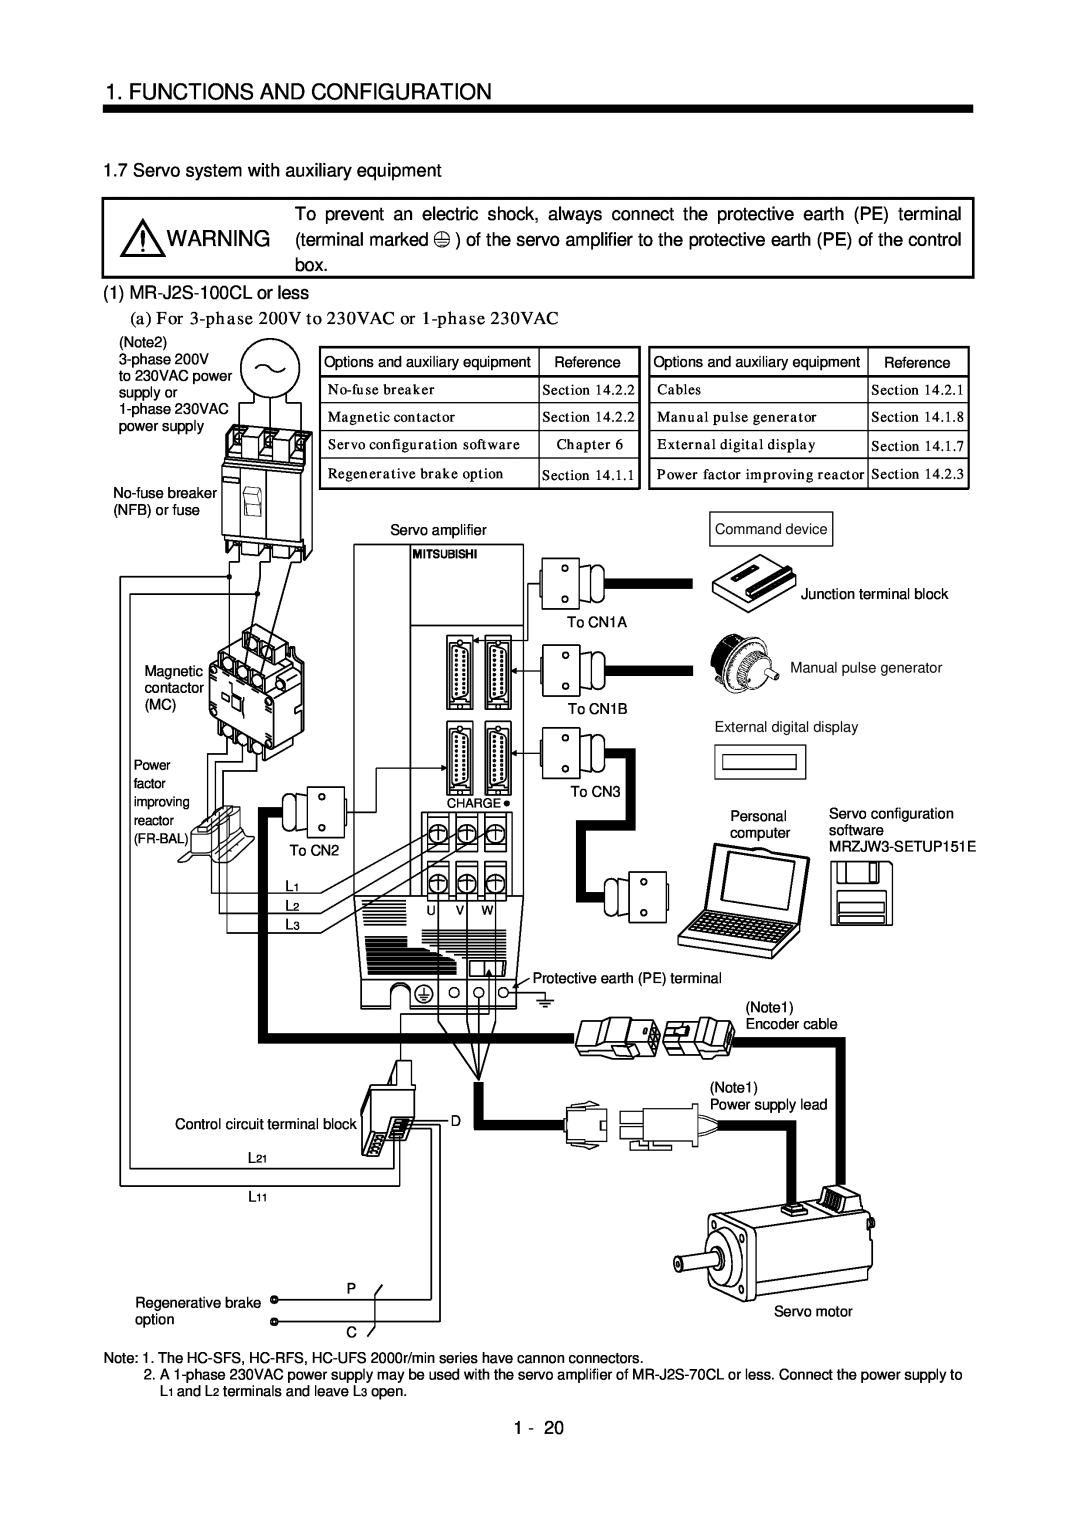 Mitsubishi Electronics MR-J2S- CL specifications Servo system with auxiliary equipment, box 1 MR-J2S-100CLor less 